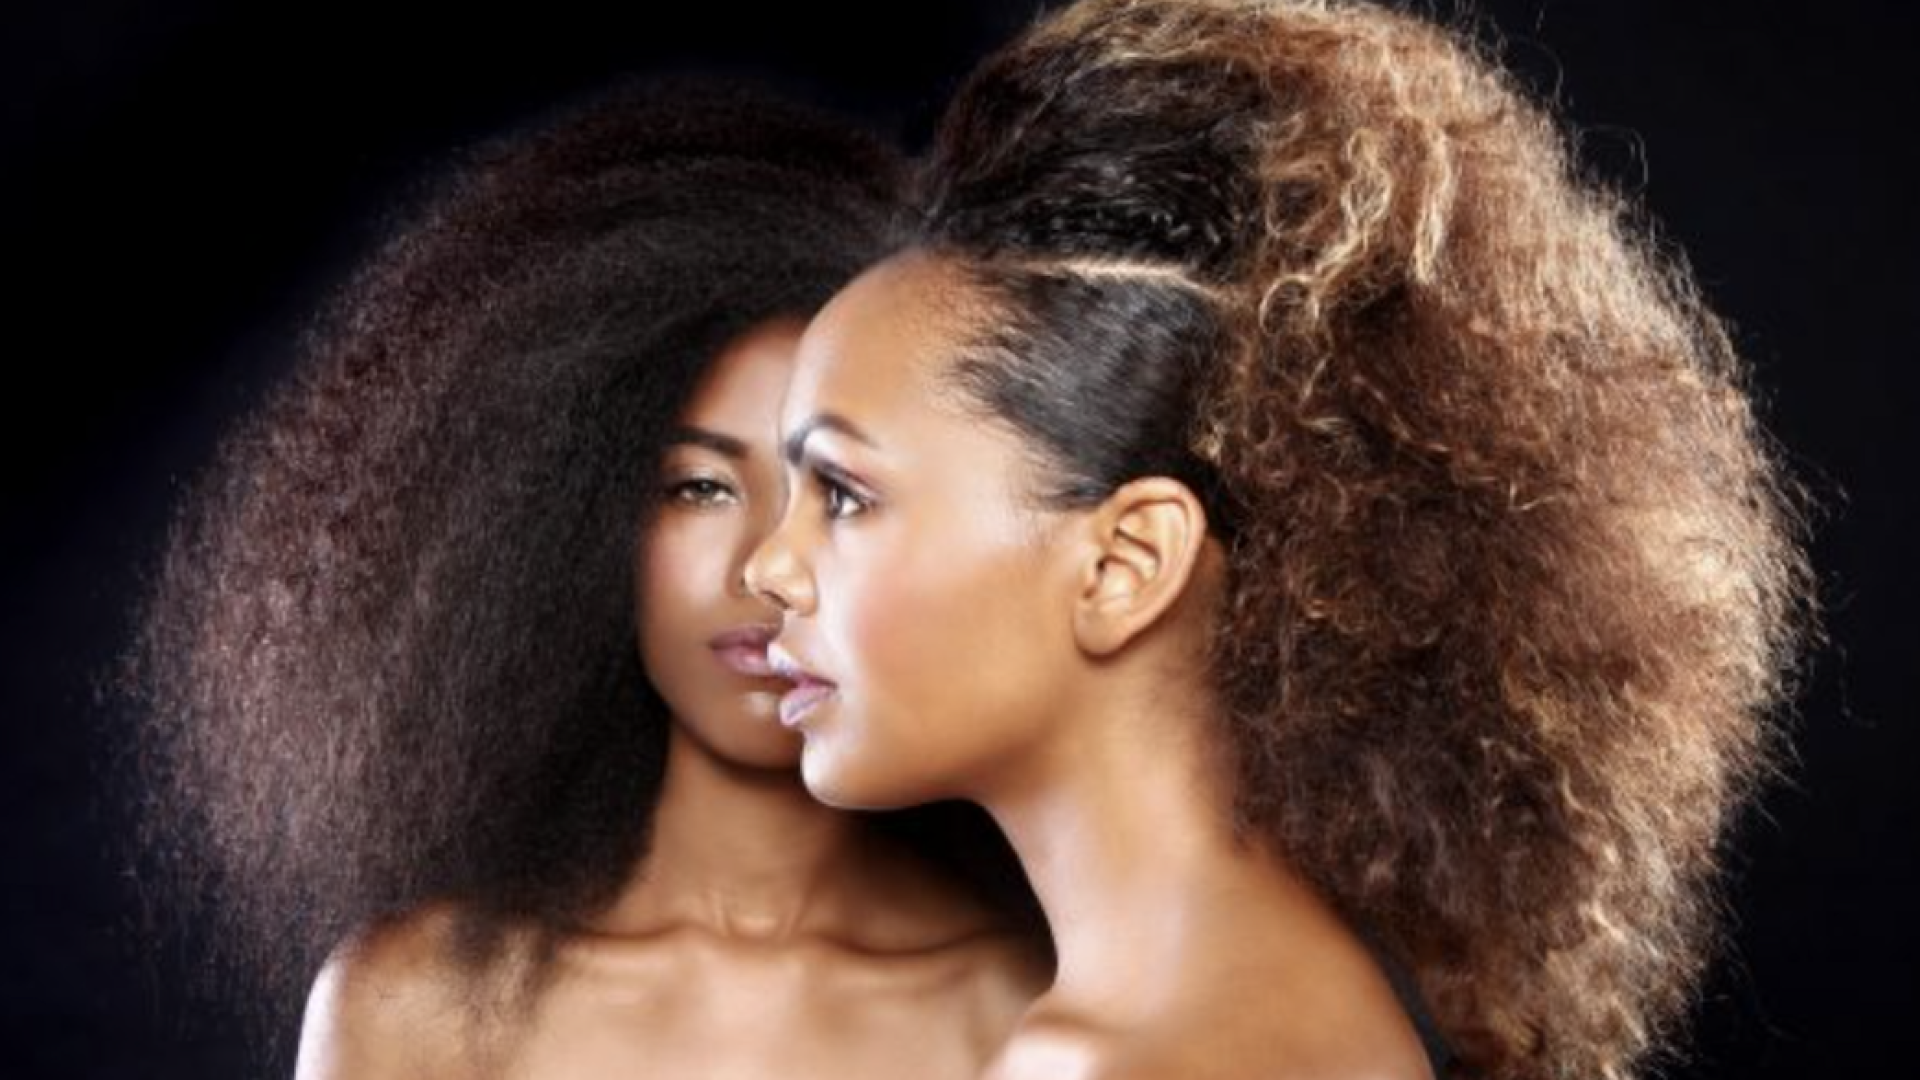 West Virginia Lawmakers Reject Passage Of CROWN Act, A Law That Bans Race-Based Hair Discrimination